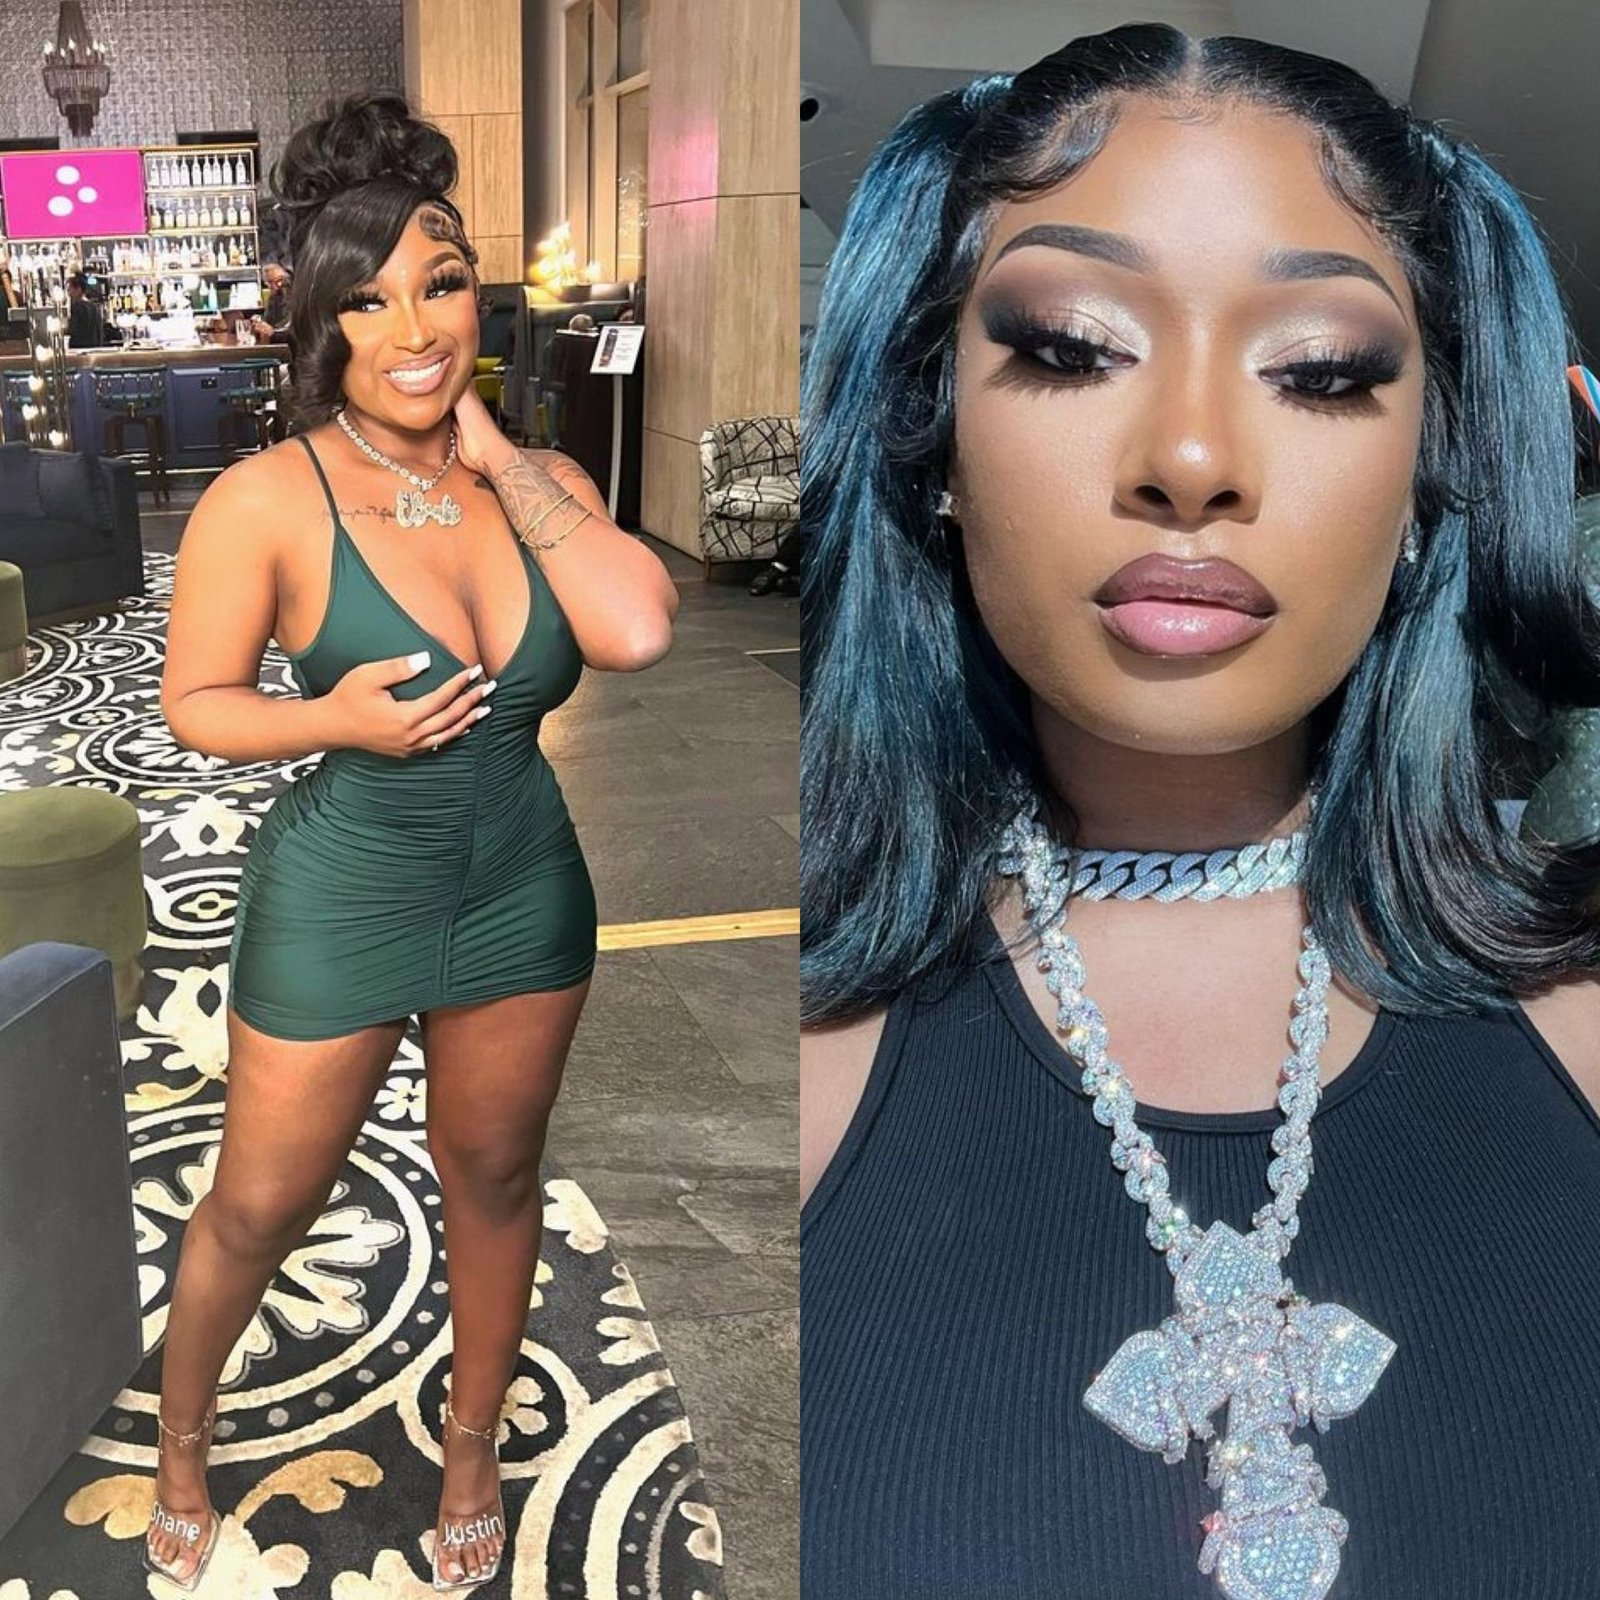 Folks Online Call Out Erica Banks For Copying Megan Thee Stallion’s ‘Thot S**t’ Music Video